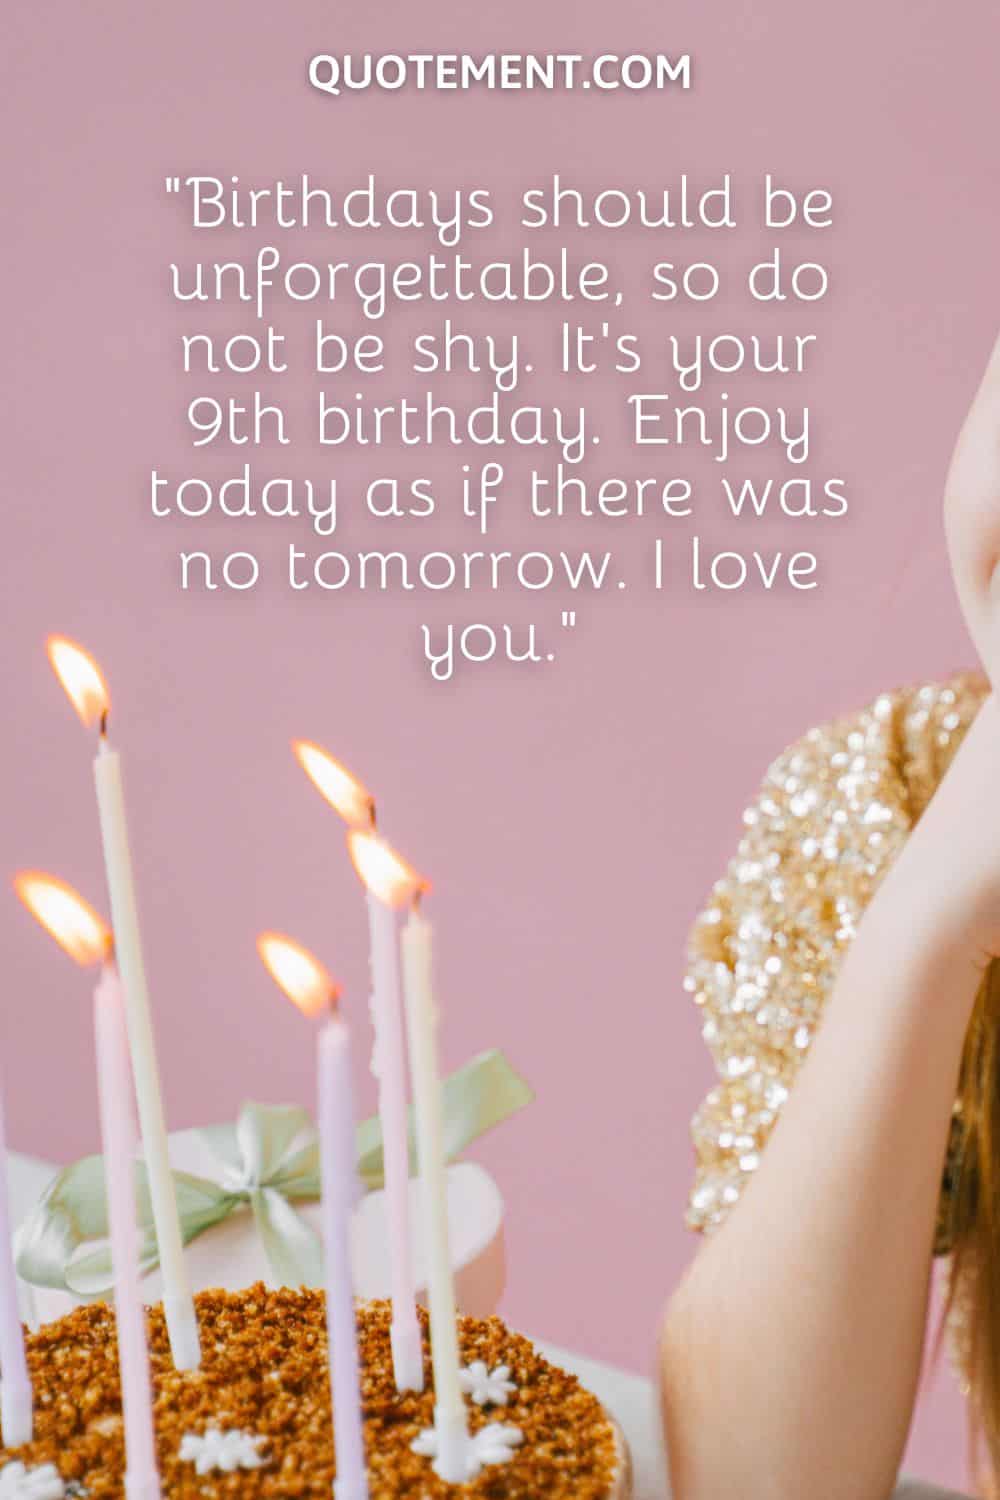 Birthdays should be unforgettable, so do not be shy